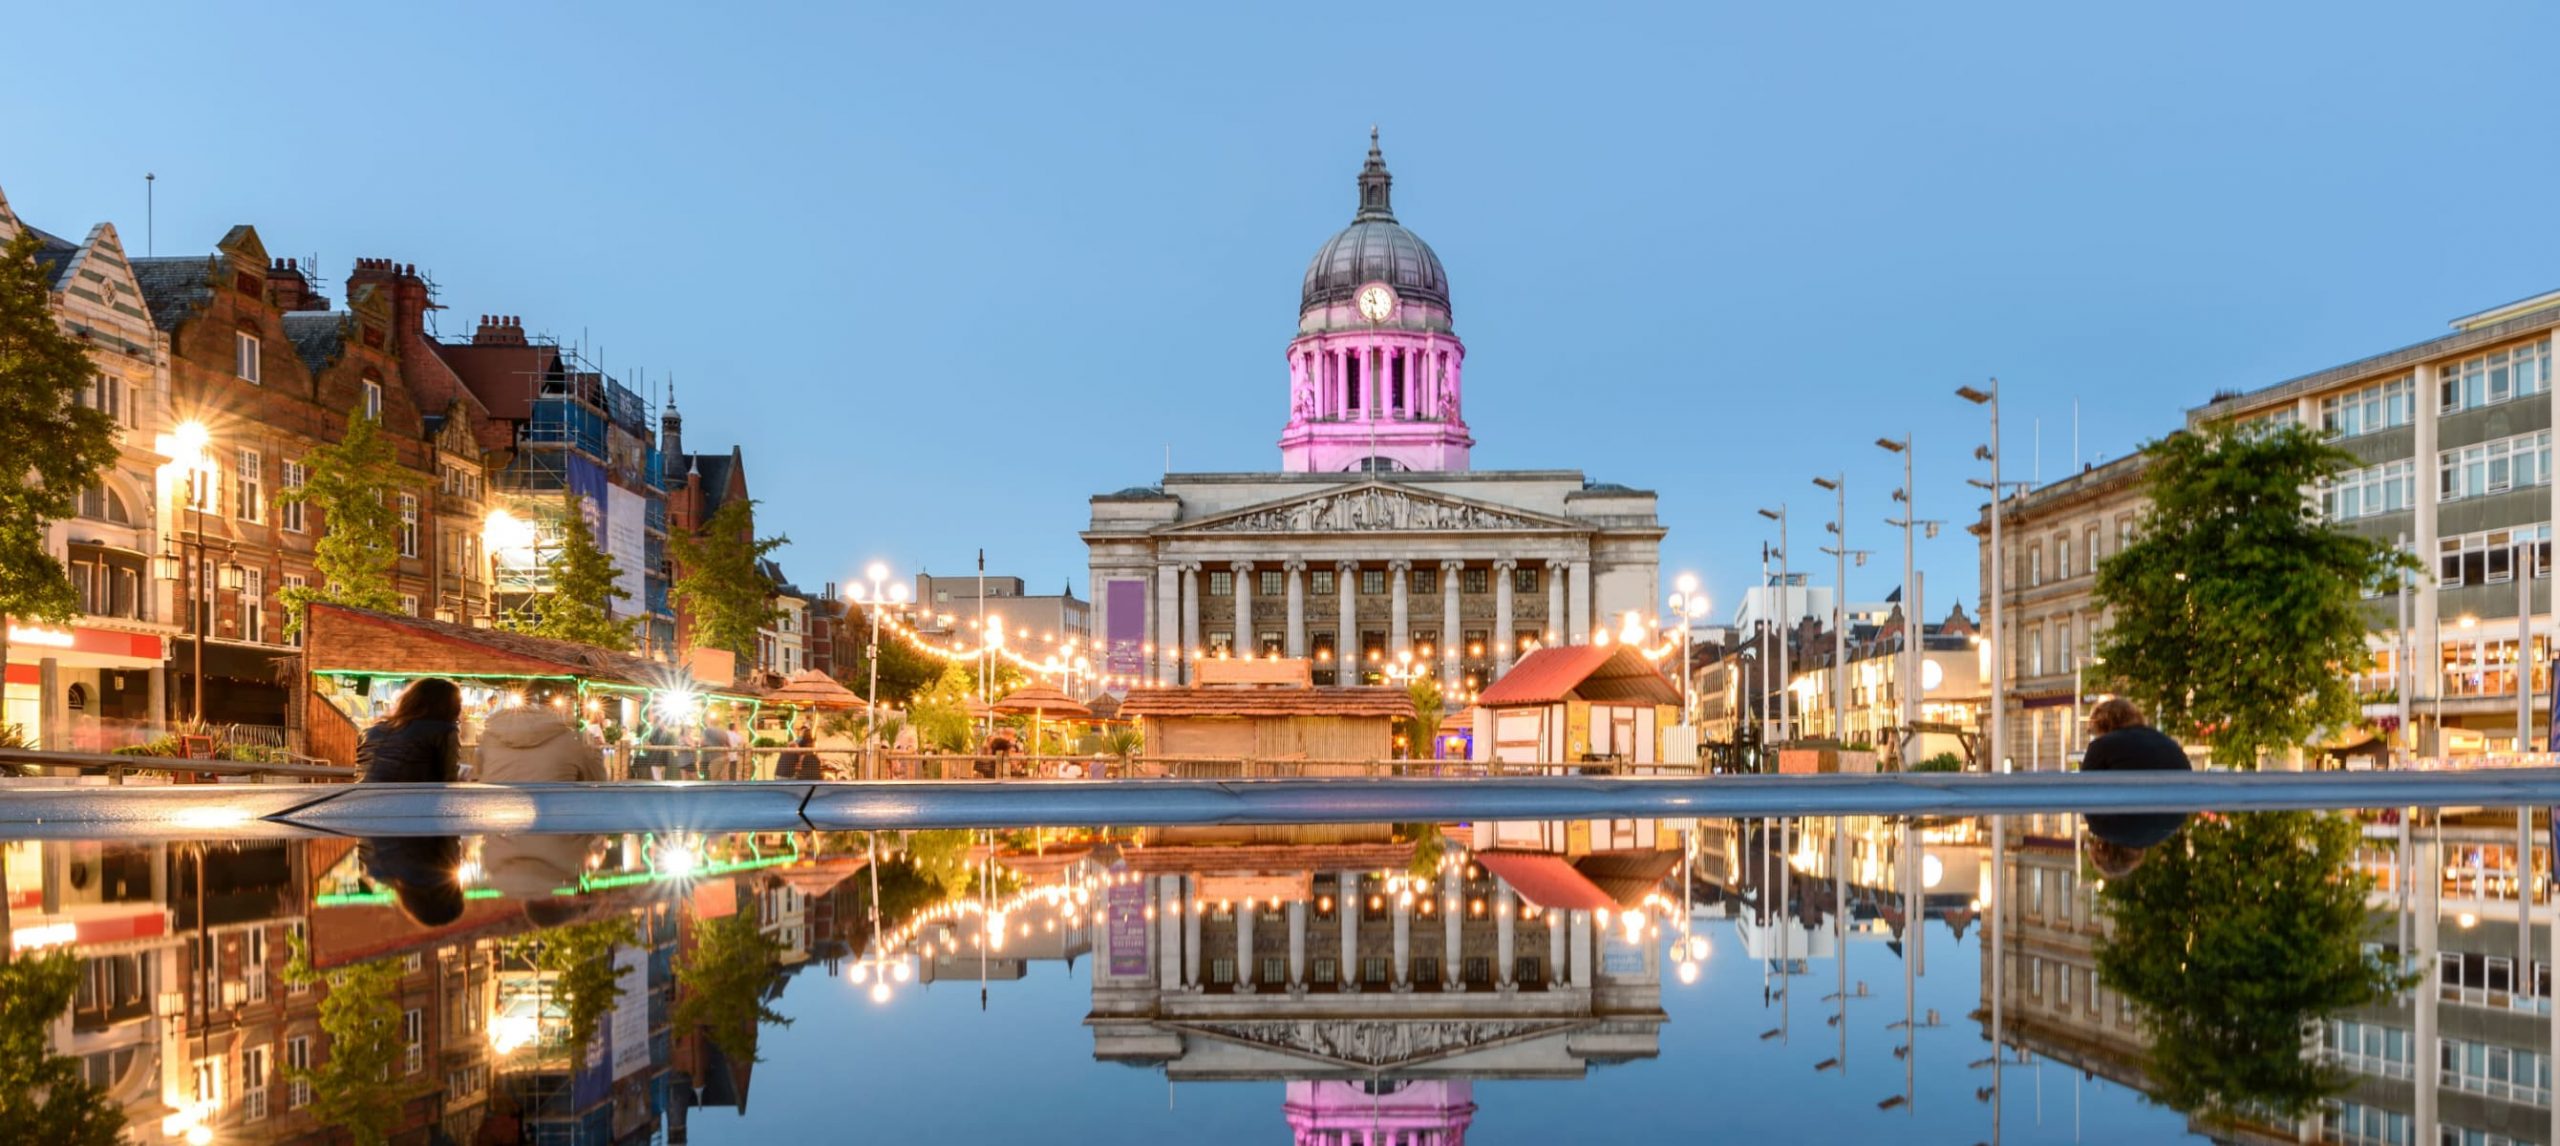 8 Best Things To Do In Nottingham For First-Time Visitors